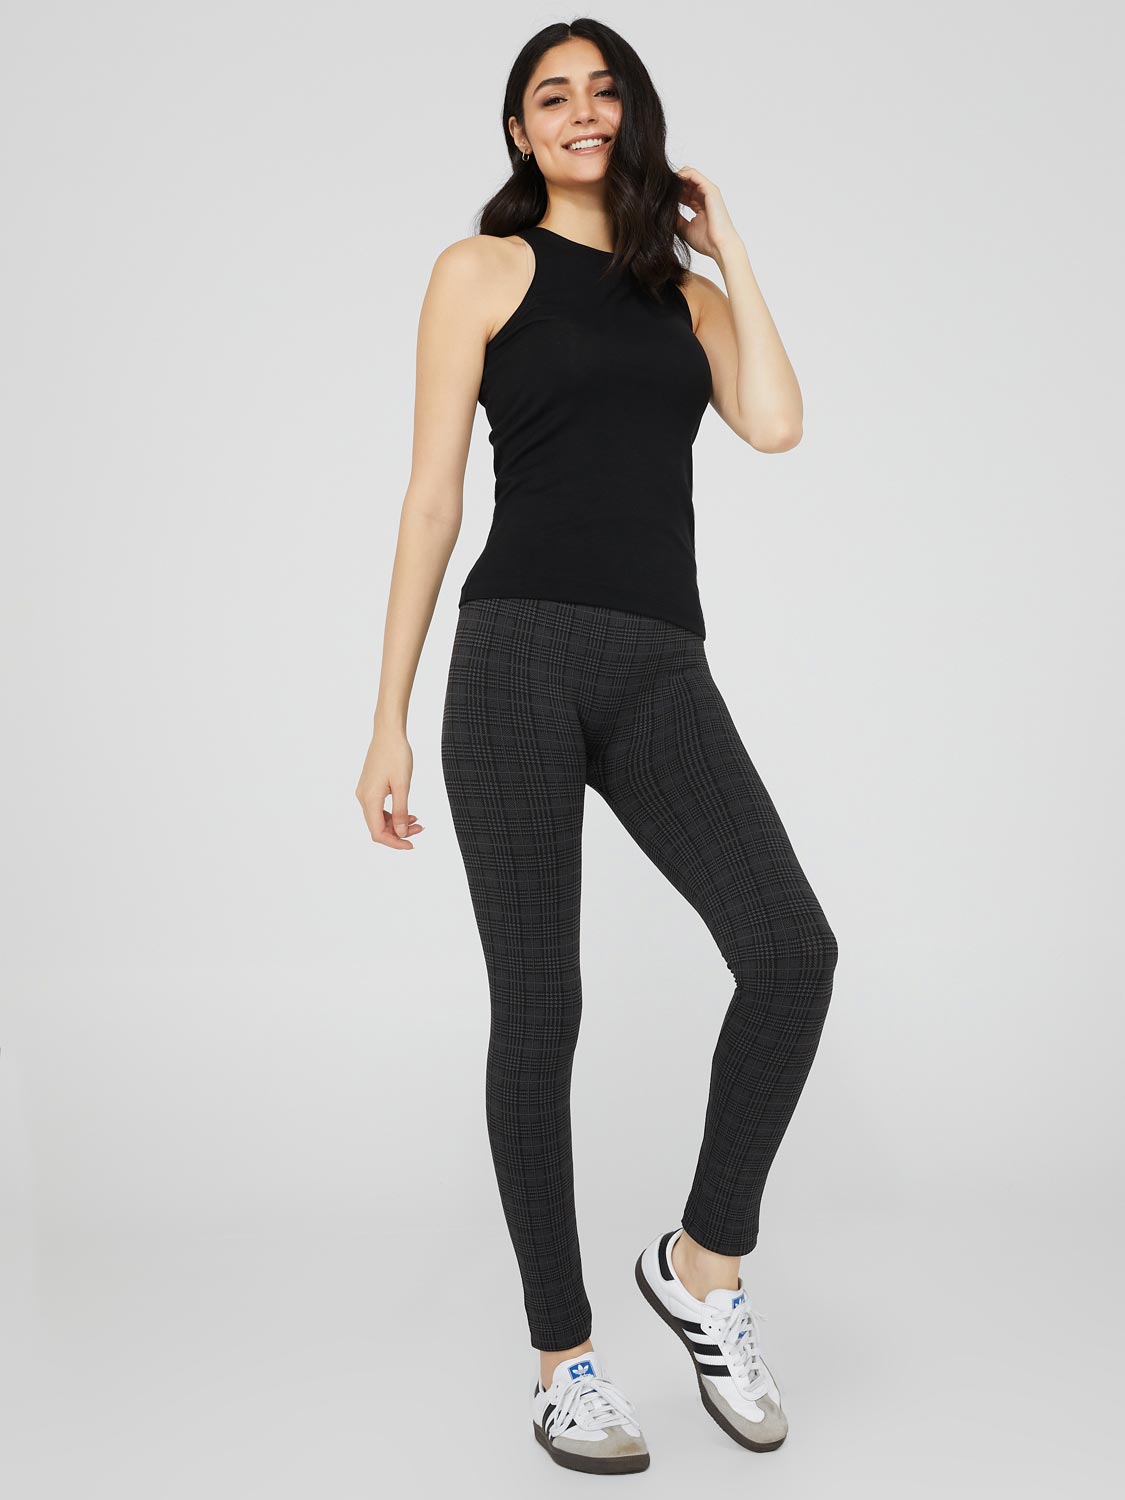 3-Pack: Womens Cozy Fleece-Lined Workout Yoga Pants Seamless